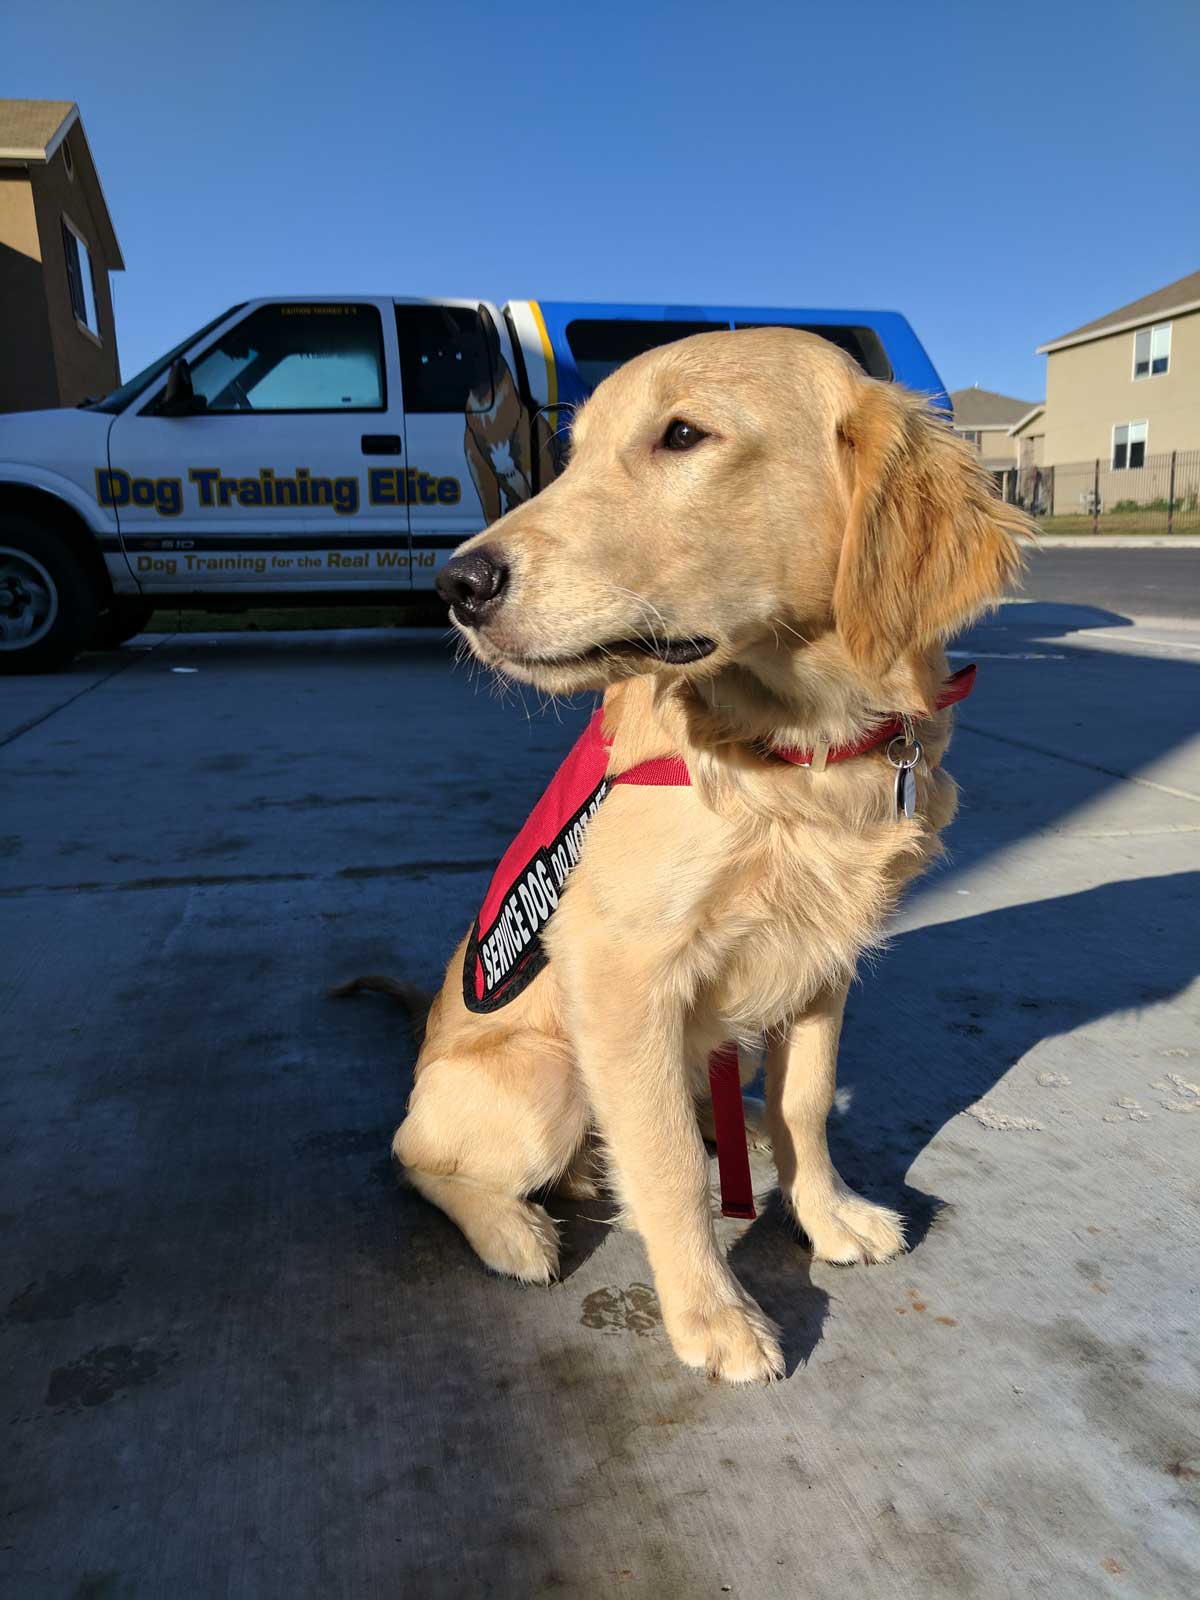 Dog Training Elite Dallas—Fort Worth is proud to have the highest rated service dog training programs near you in Frisco.